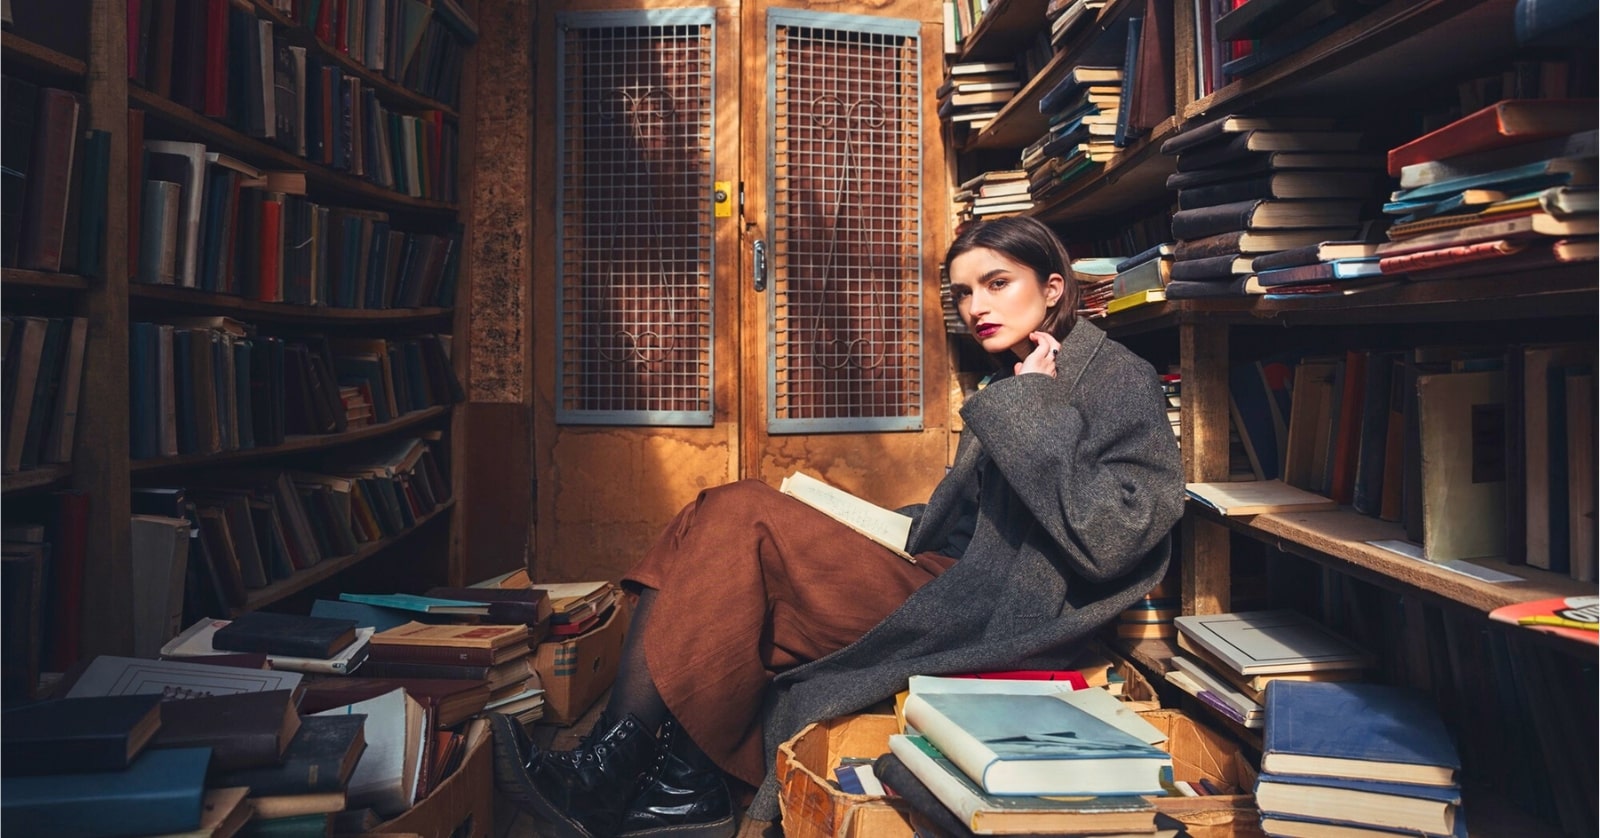 young woman sitting among hundreds of books on bookcases and piled in boxes